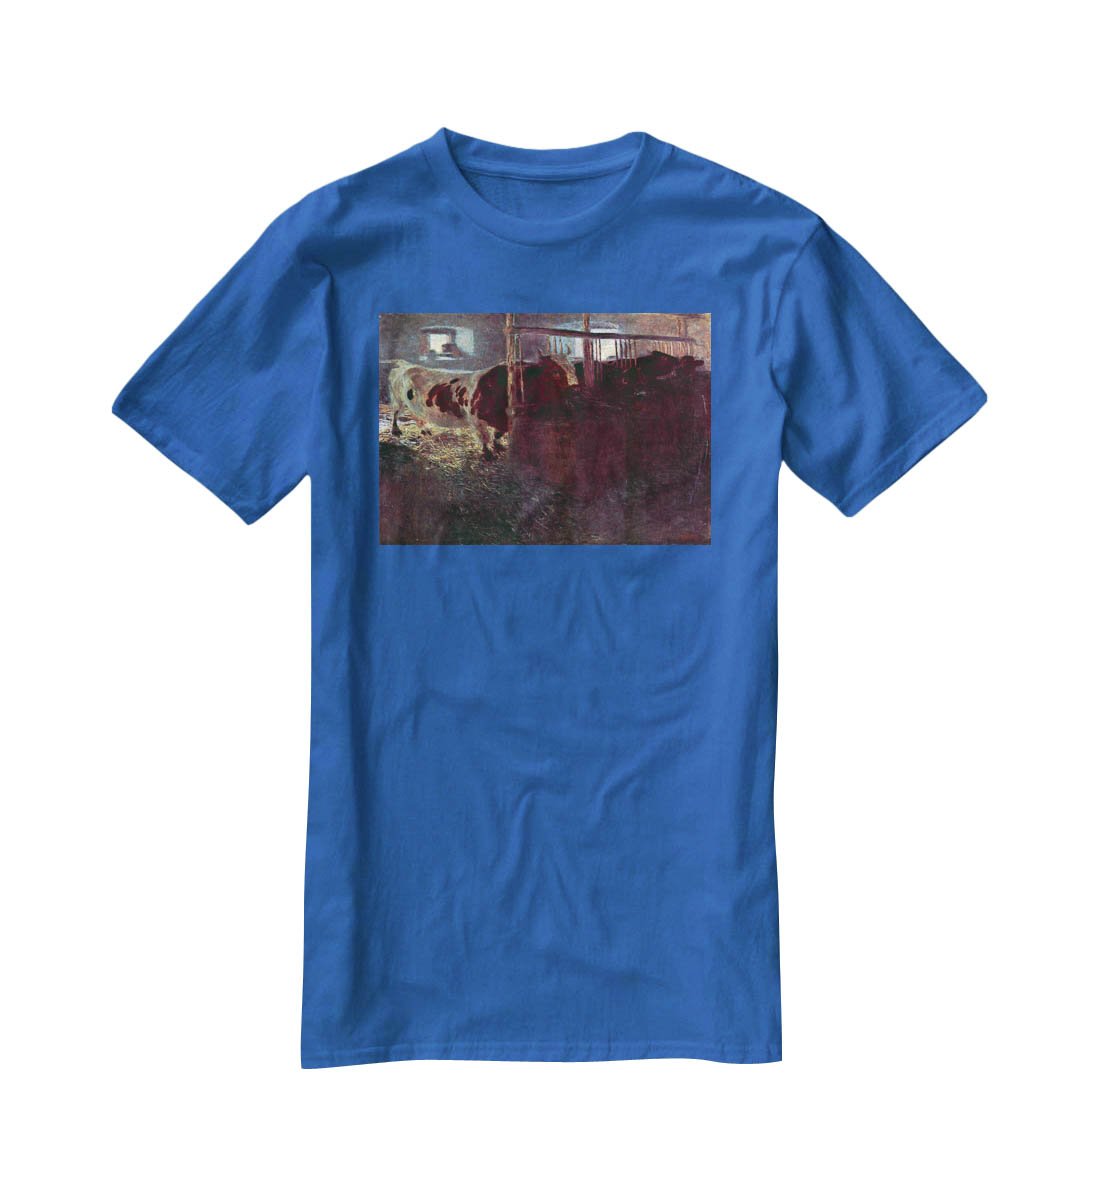 Cows in Stall by Klimt T-Shirt - Canvas Art Rocks - 2